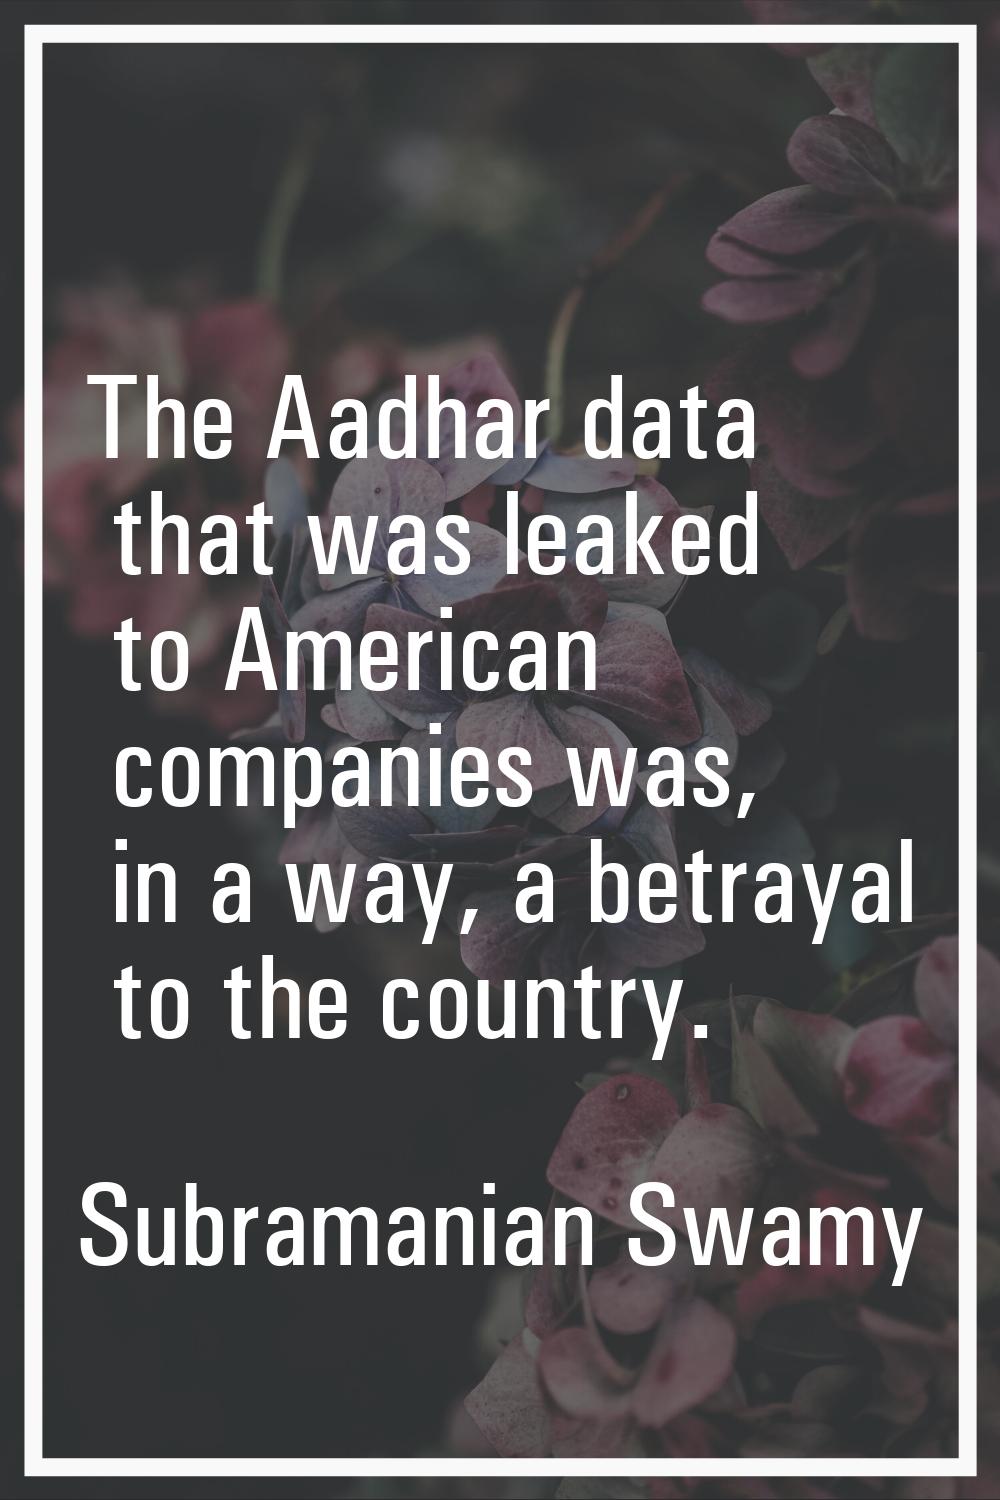 The Aadhar data that was leaked to American companies was, in a way, a betrayal to the country.